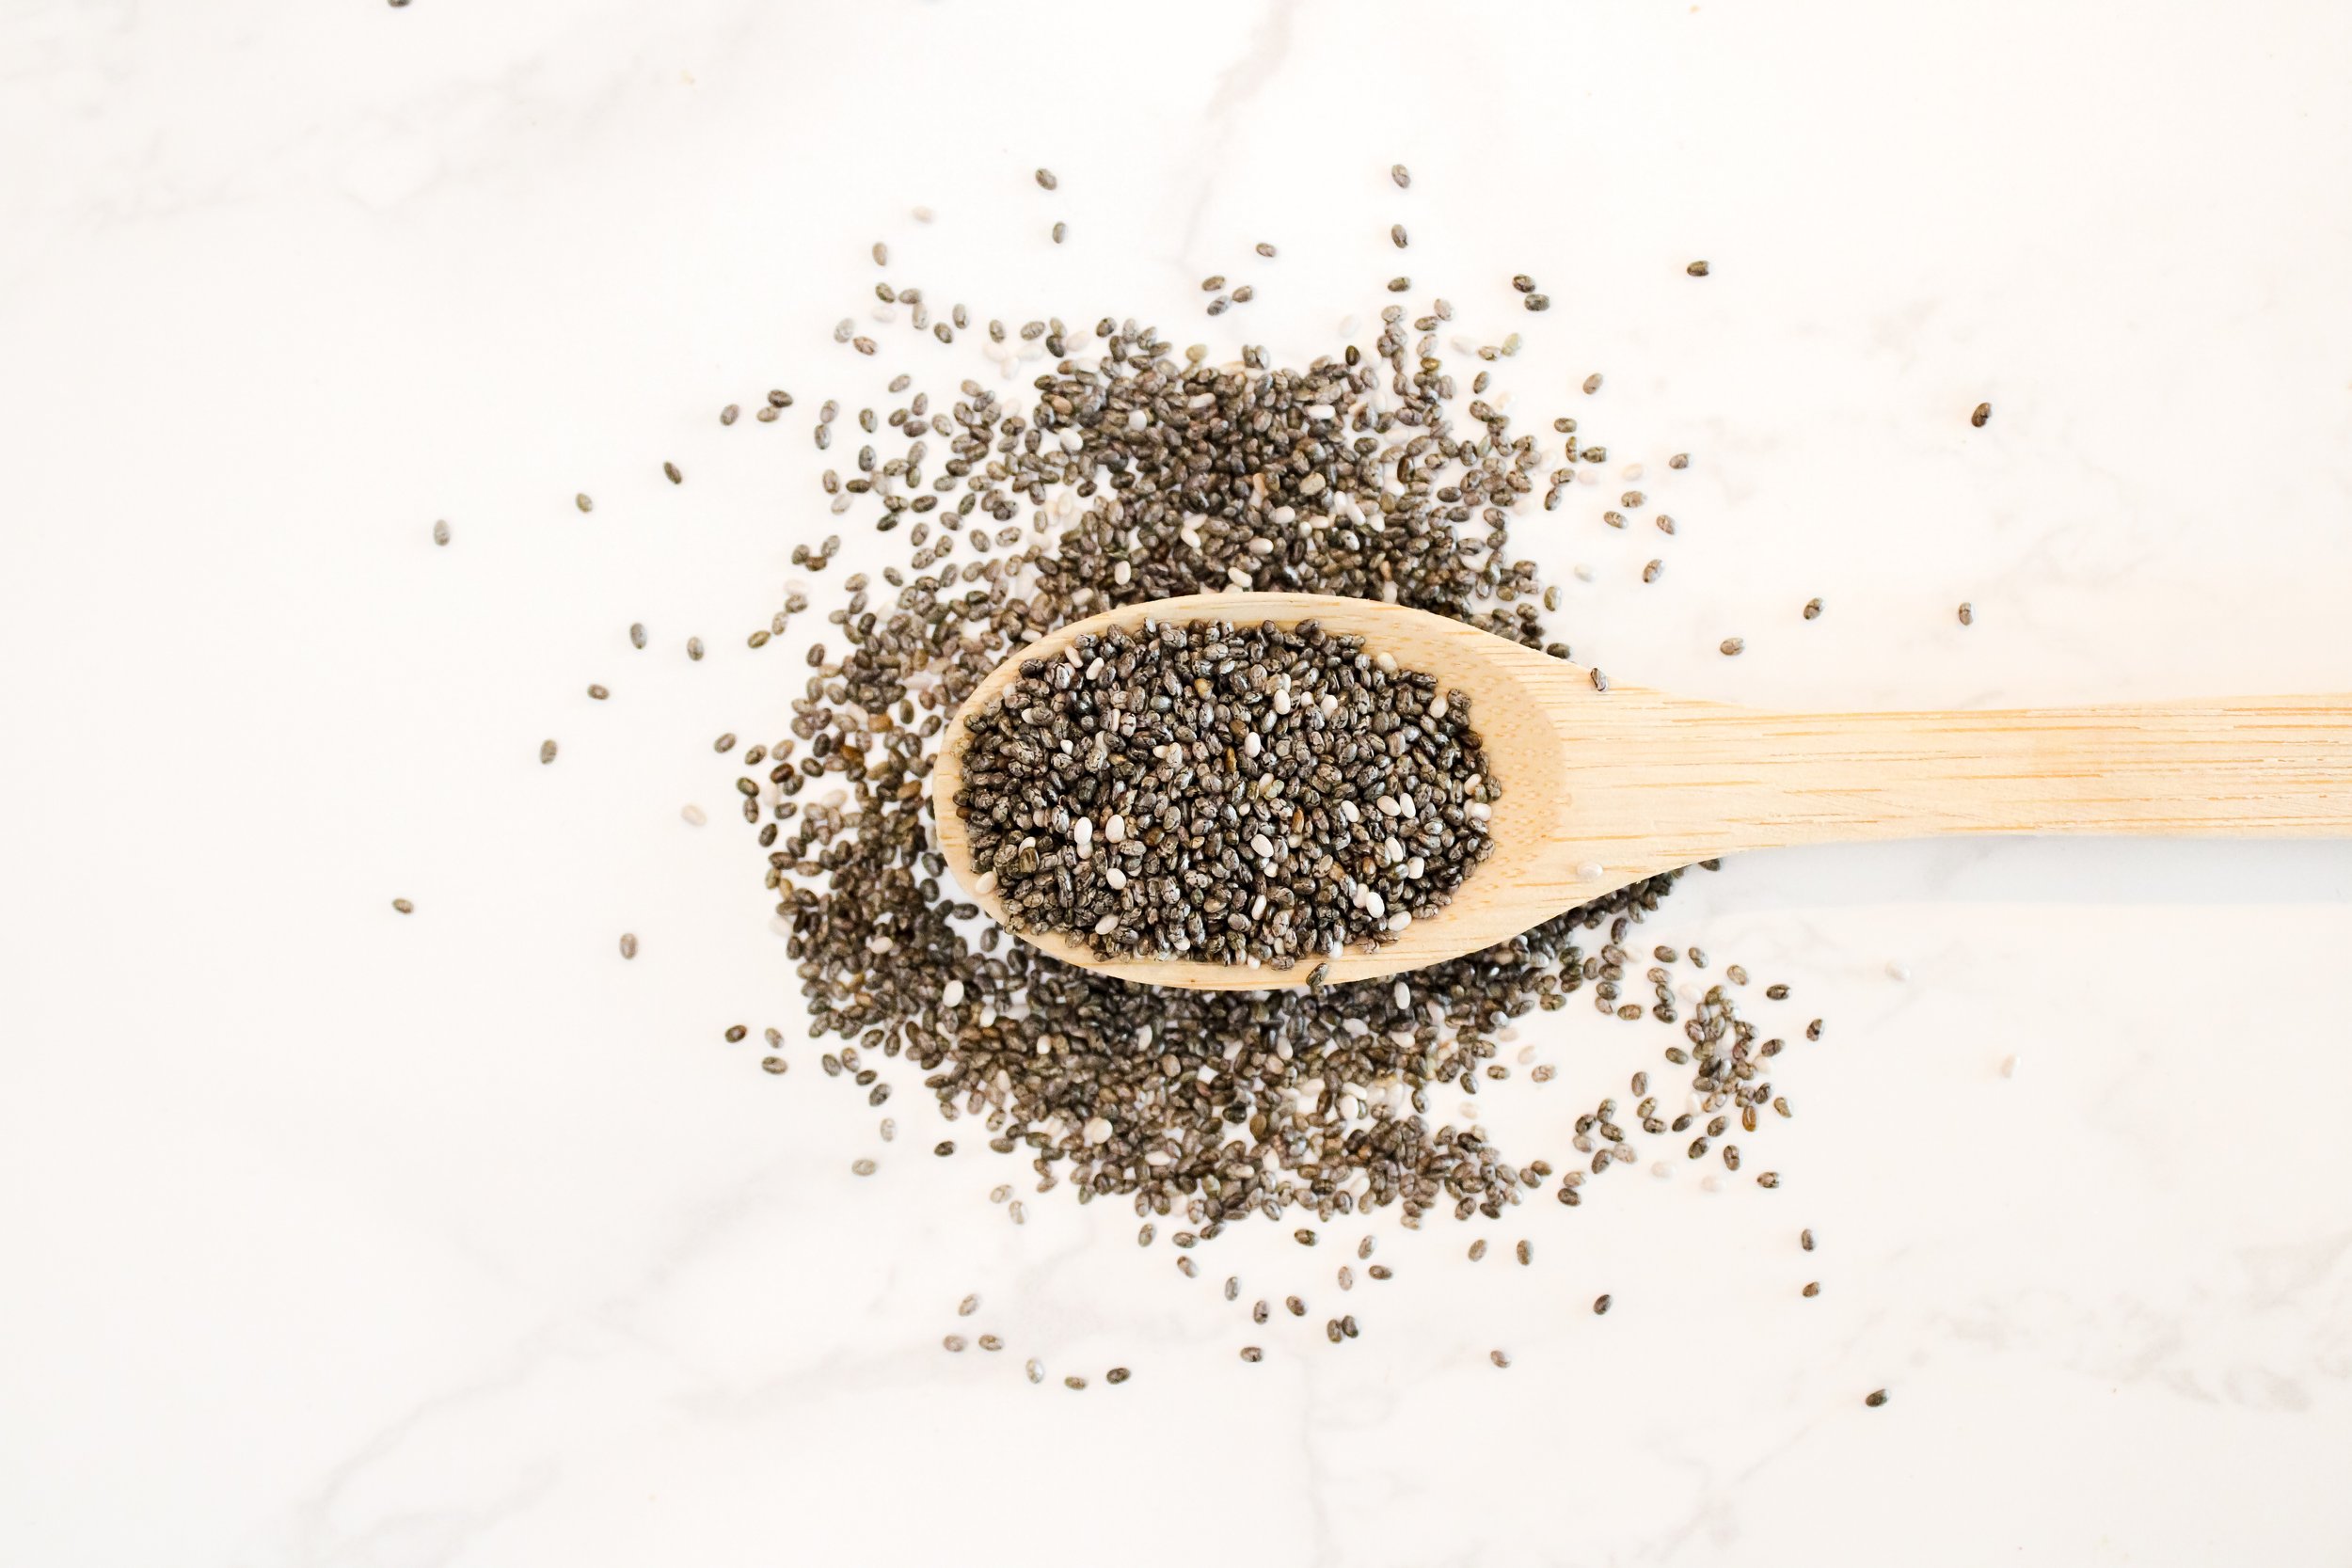 6 substitutes for chia seeds